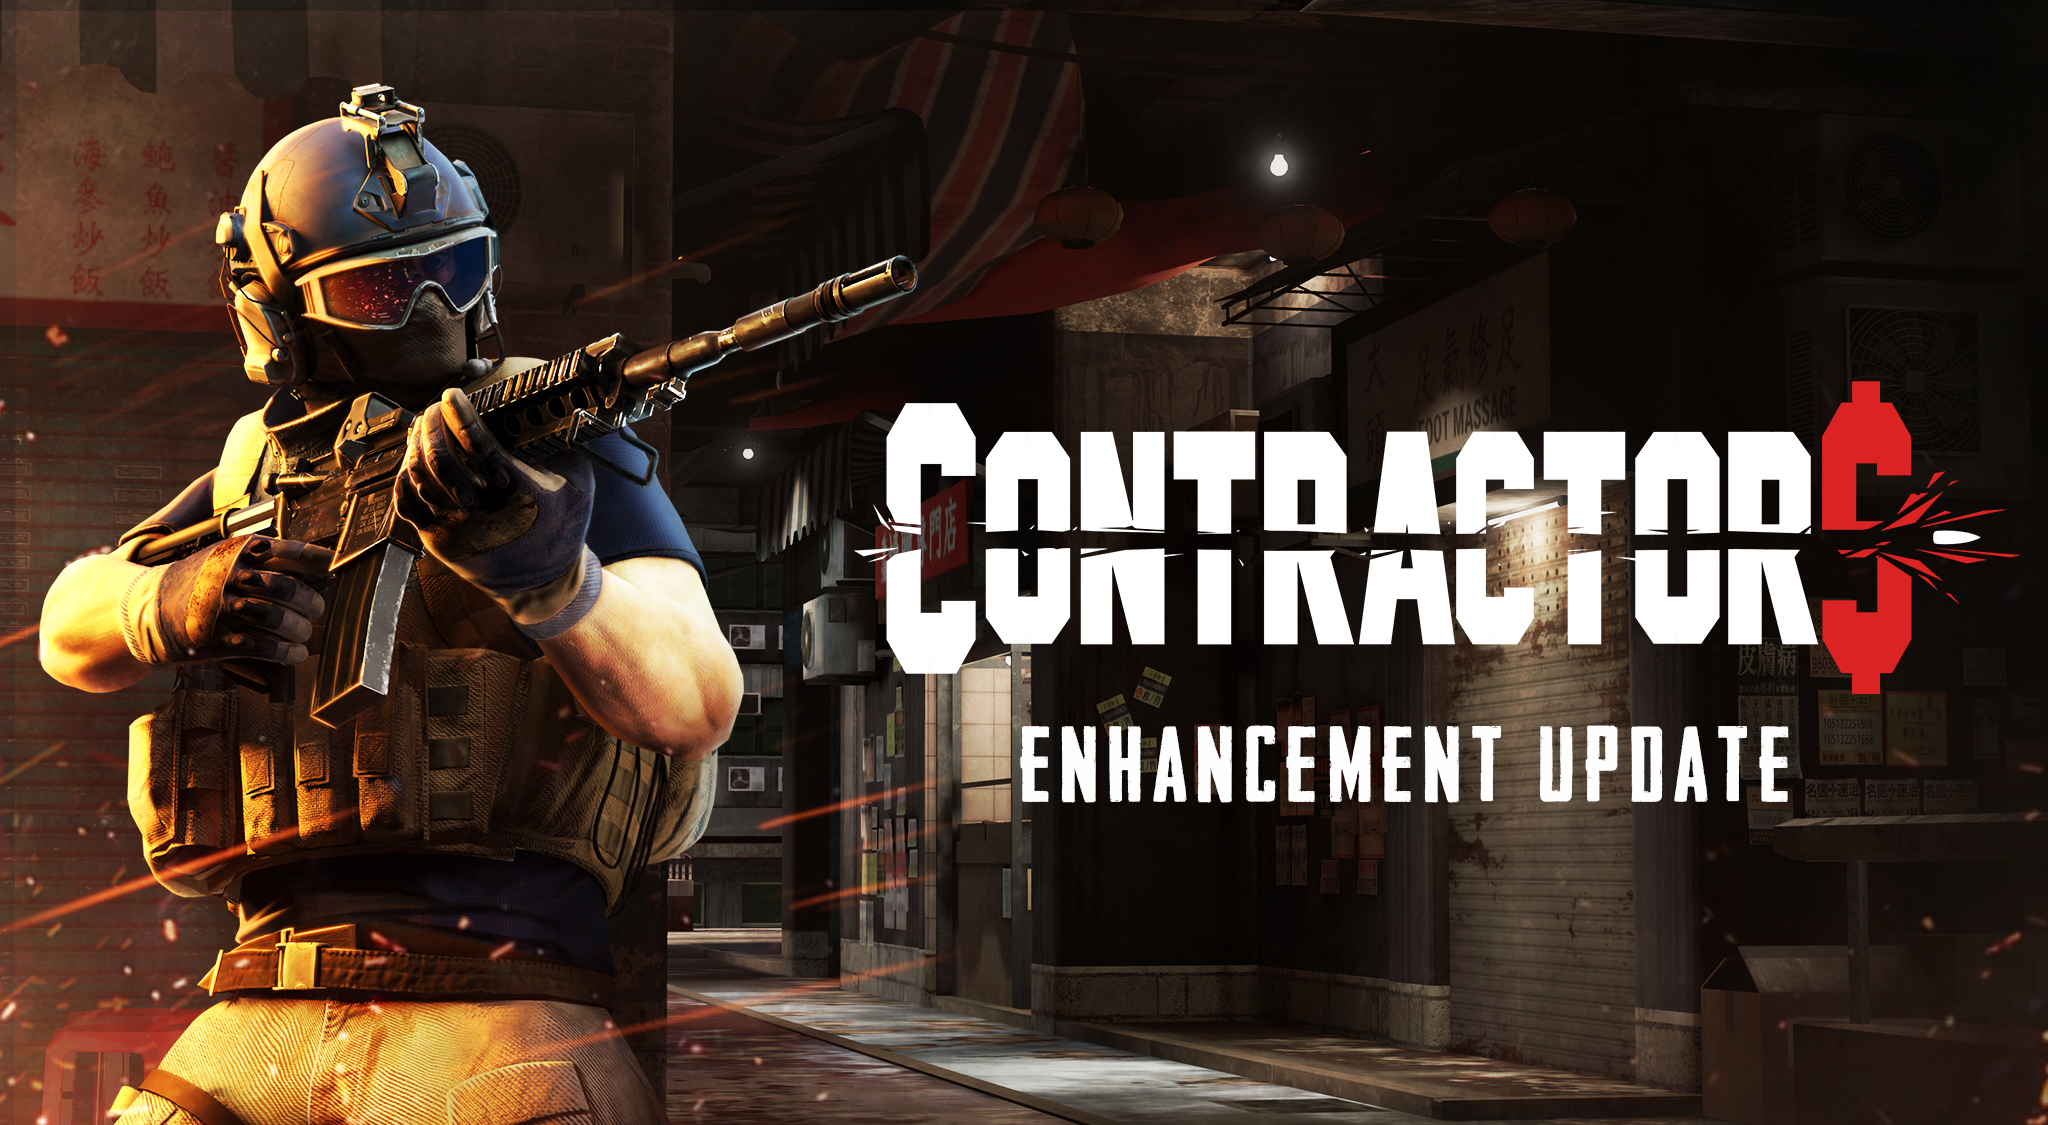 Contractors v.0.90 Enhancement Update Is Now Available · Contractors update for 11 November 2021 · SteamDB